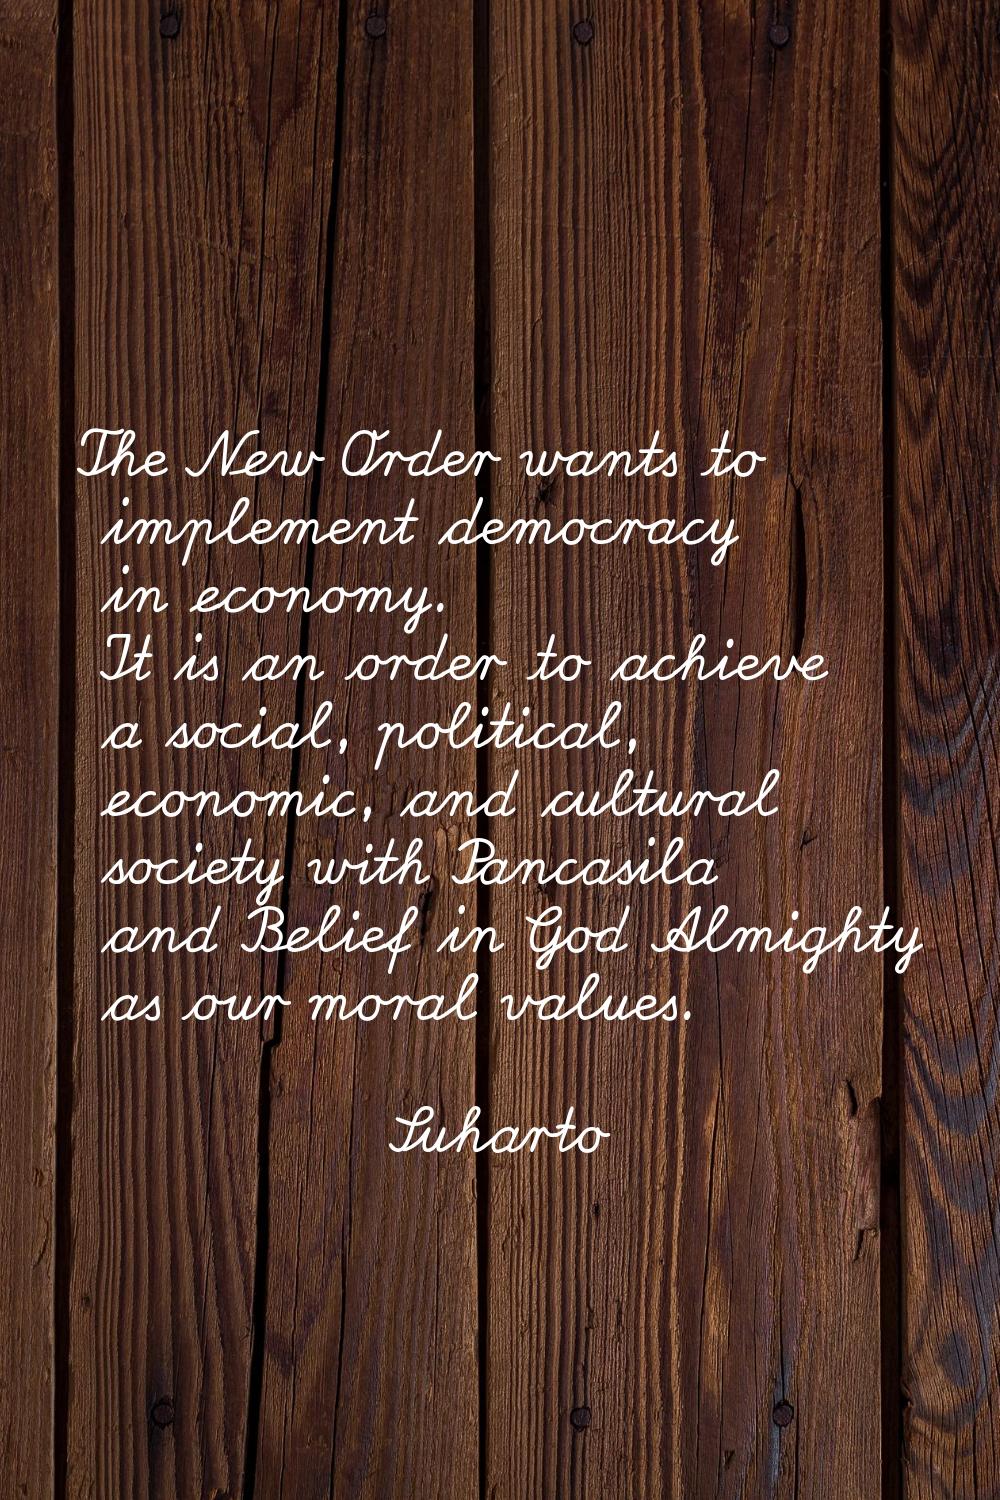 The New Order wants to implement democracy in economy. It is an order to achieve a social, politica